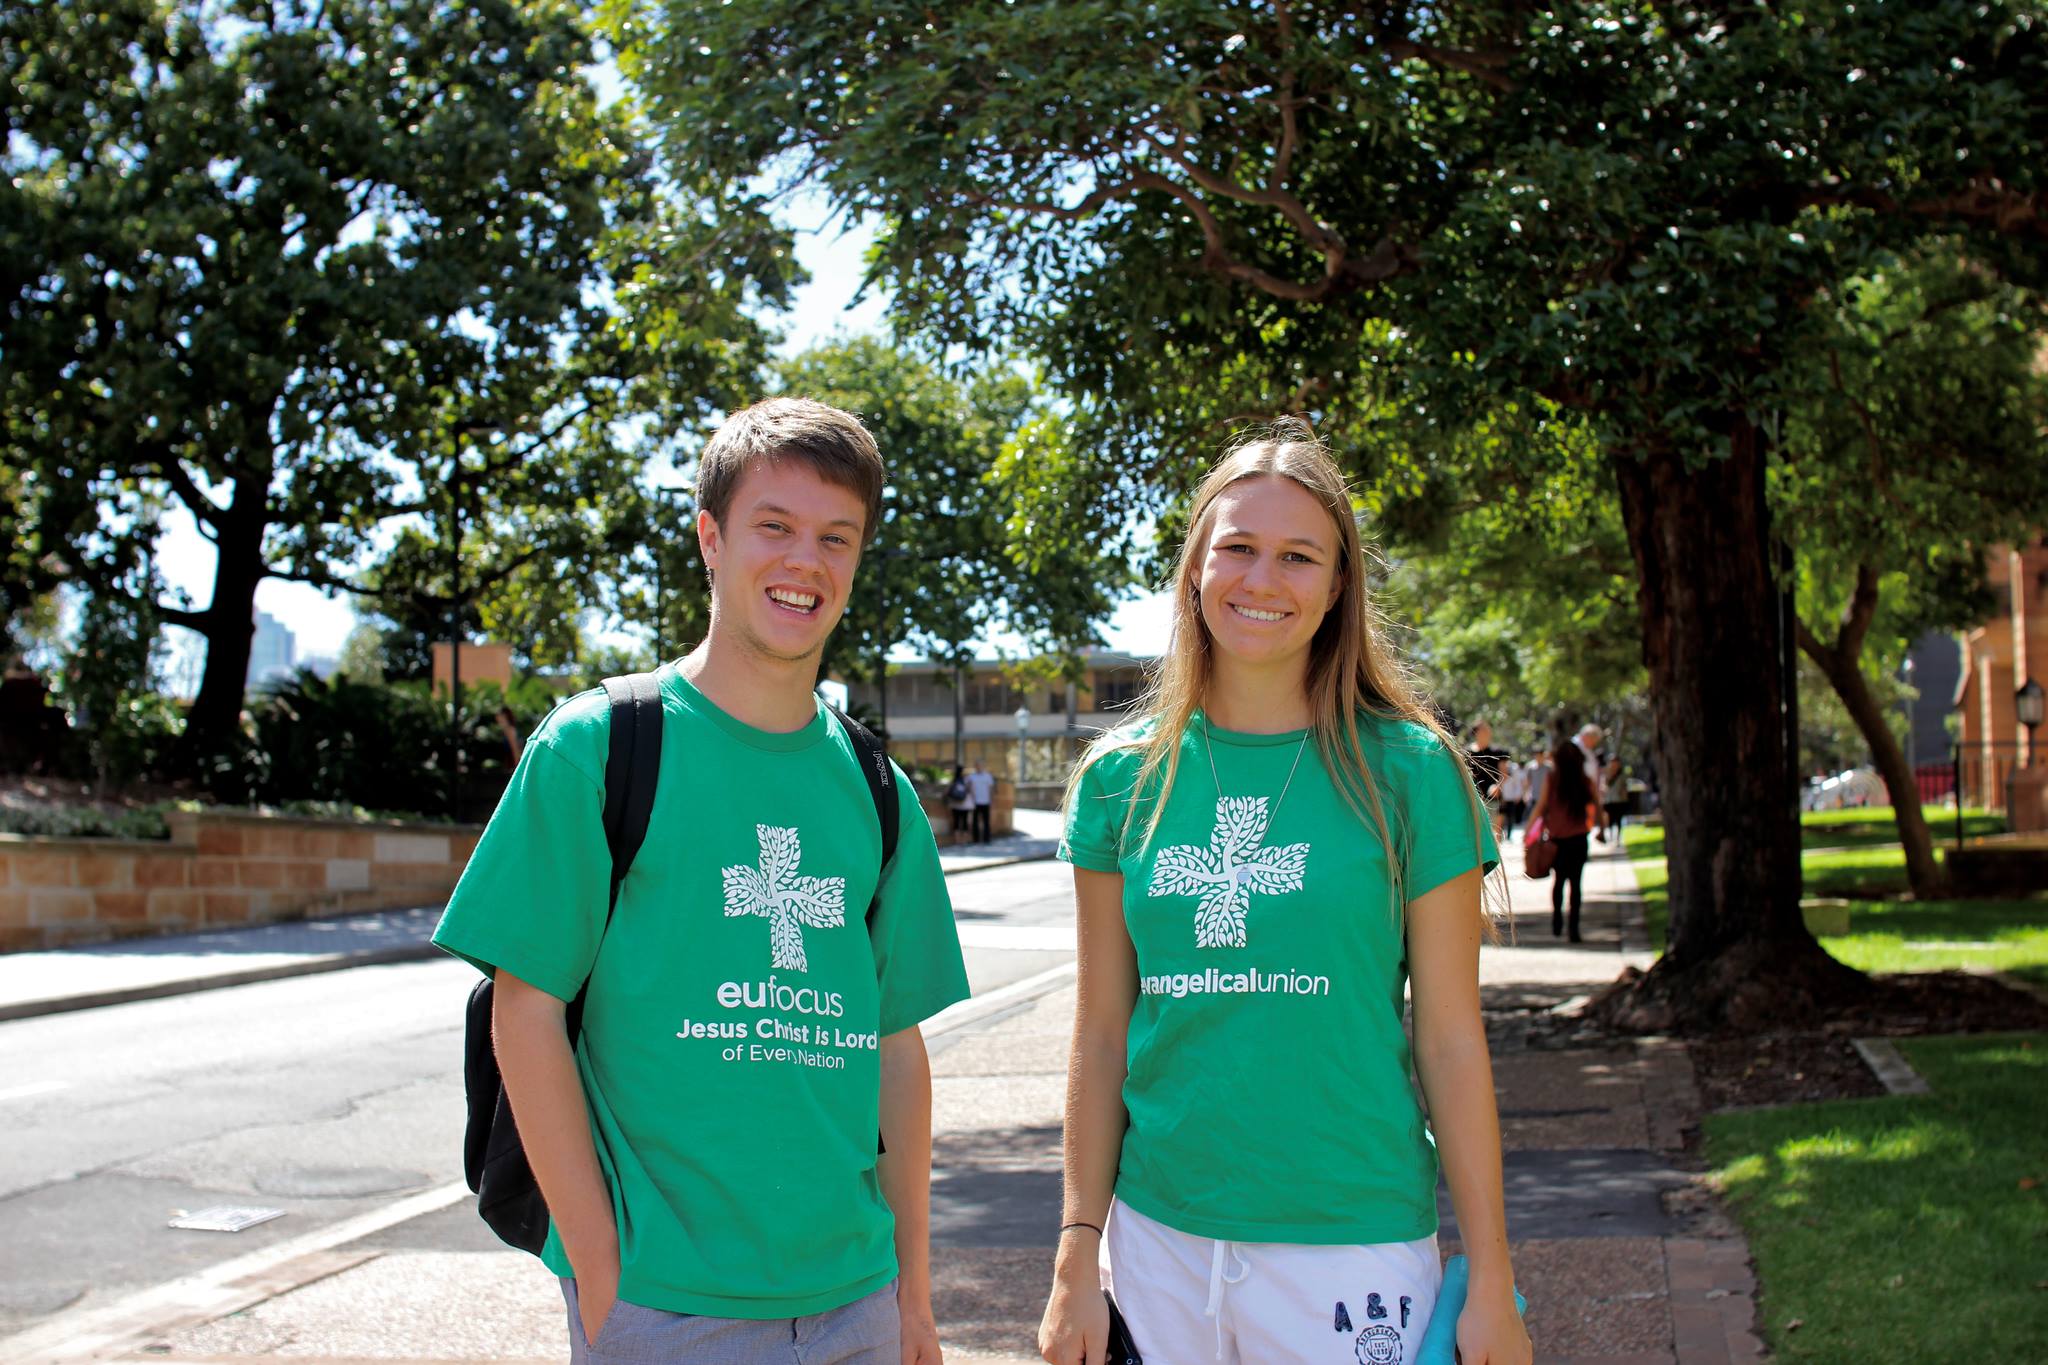 Two students from Sydney University's Evangelical Union